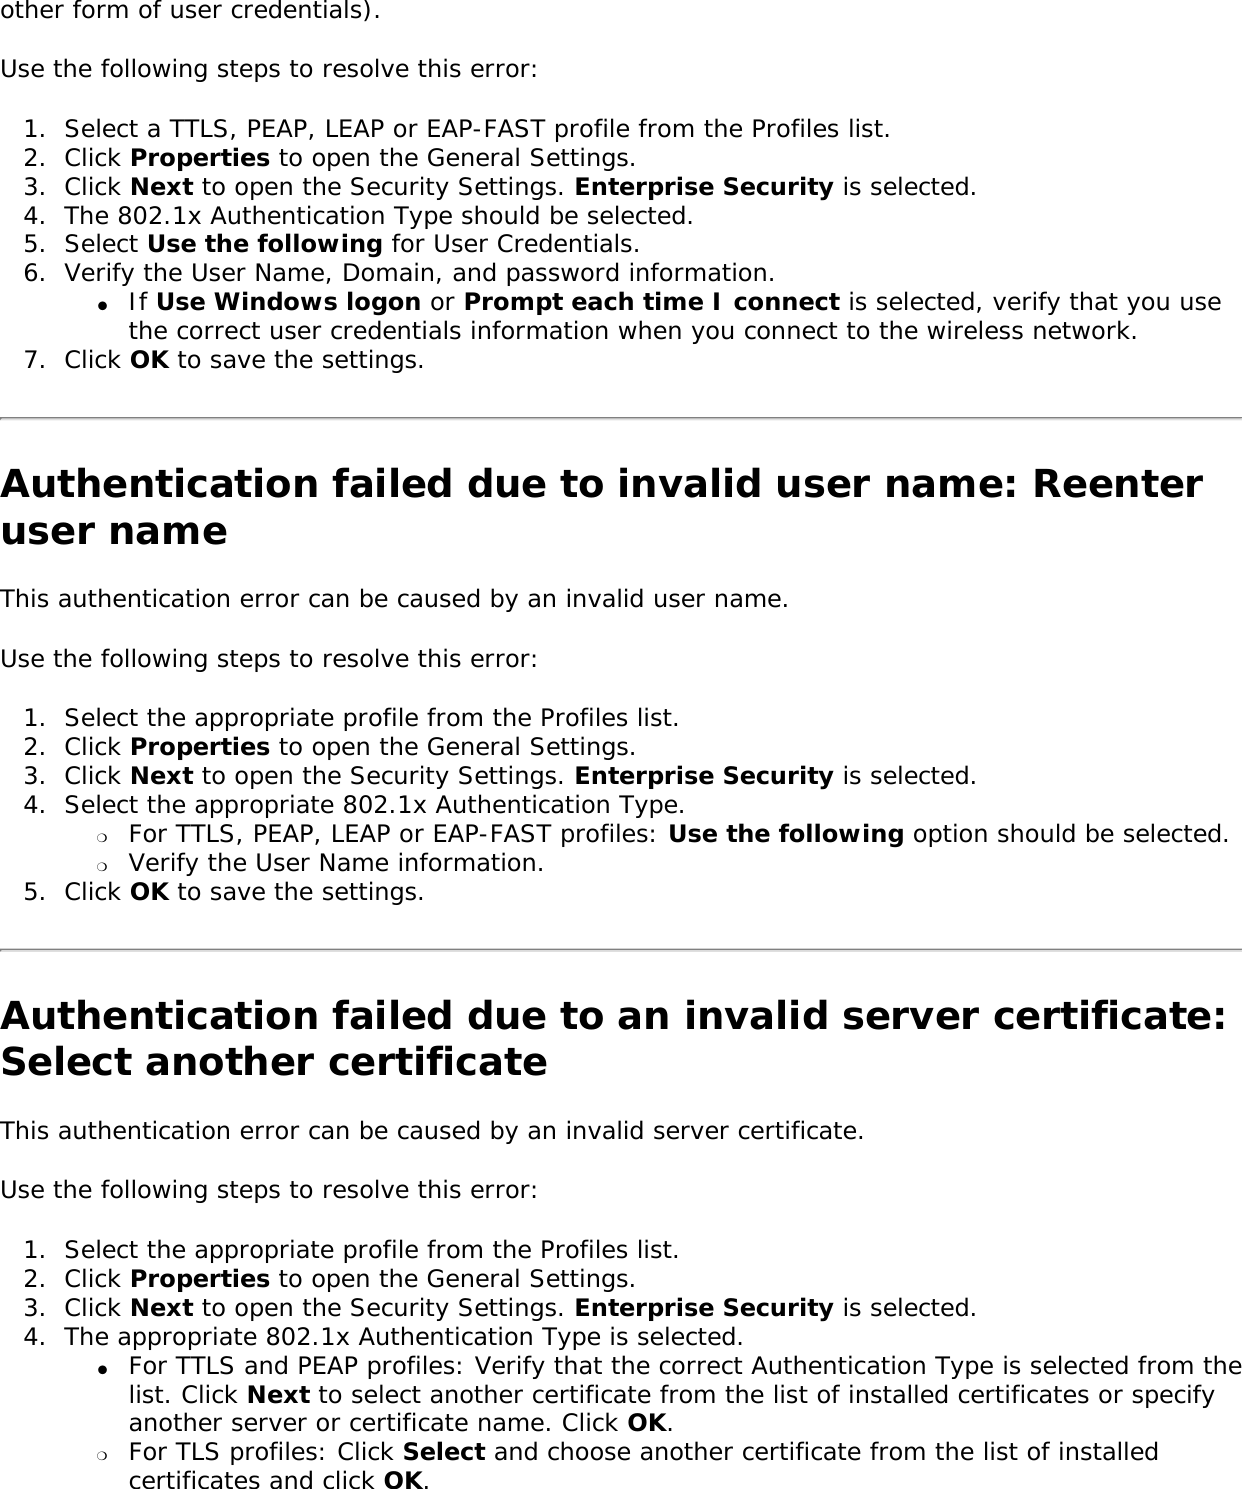 other form of user credentials). Use the following steps to resolve this error: 1.  Select a TTLS, PEAP, LEAP or EAP-FAST profile from the Profiles list. 2.  Click Properties to open the General Settings. 3.  Click Next to open the Security Settings. Enterprise Security is selected. 4.  The 802.1x Authentication Type should be selected.5.  Select Use the following for User Credentials.6.  Verify the User Name, Domain, and password information.●     If Use Windows logon or Prompt each time I connect is selected, verify that you use the correct user credentials information when you connect to the wireless network.7.  Click OK to save the settings. Authentication failed due to invalid user name: Reenter user nameThis authentication error can be caused by an invalid user name.    Use the following steps to resolve this error: 1.  Select the appropriate profile from the Profiles list. 2.  Click Properties to open the General Settings.3.  Click Next to open the Security Settings. Enterprise Security is selected. 4.  Select the appropriate 802.1x Authentication Type.❍     For TTLS, PEAP, LEAP or EAP-FAST profiles: Use the following option should be selected. ❍     Verify the User Name information.5.  Click OK to save the settings. Authentication failed due to an invalid server certificate: Select another certificate This authentication error can be caused by an invalid server certificate. Use the following steps to resolve this error: 1.  Select the appropriate profile from the Profiles list. 2.  Click Properties to open the General Settings.3.  Click Next to open the Security Settings. Enterprise Security is selected. 4.  The appropriate 802.1x Authentication Type is selected. ●     For TTLS and PEAP profiles: Verify that the correct Authentication Type is selected from the list. Click Next to select another certificate from the list of installed certificates or specify another server or certificate name. Click OK. ❍     For TLS profiles: Click Select and choose another certificate from the list of installed certificates and click OK.